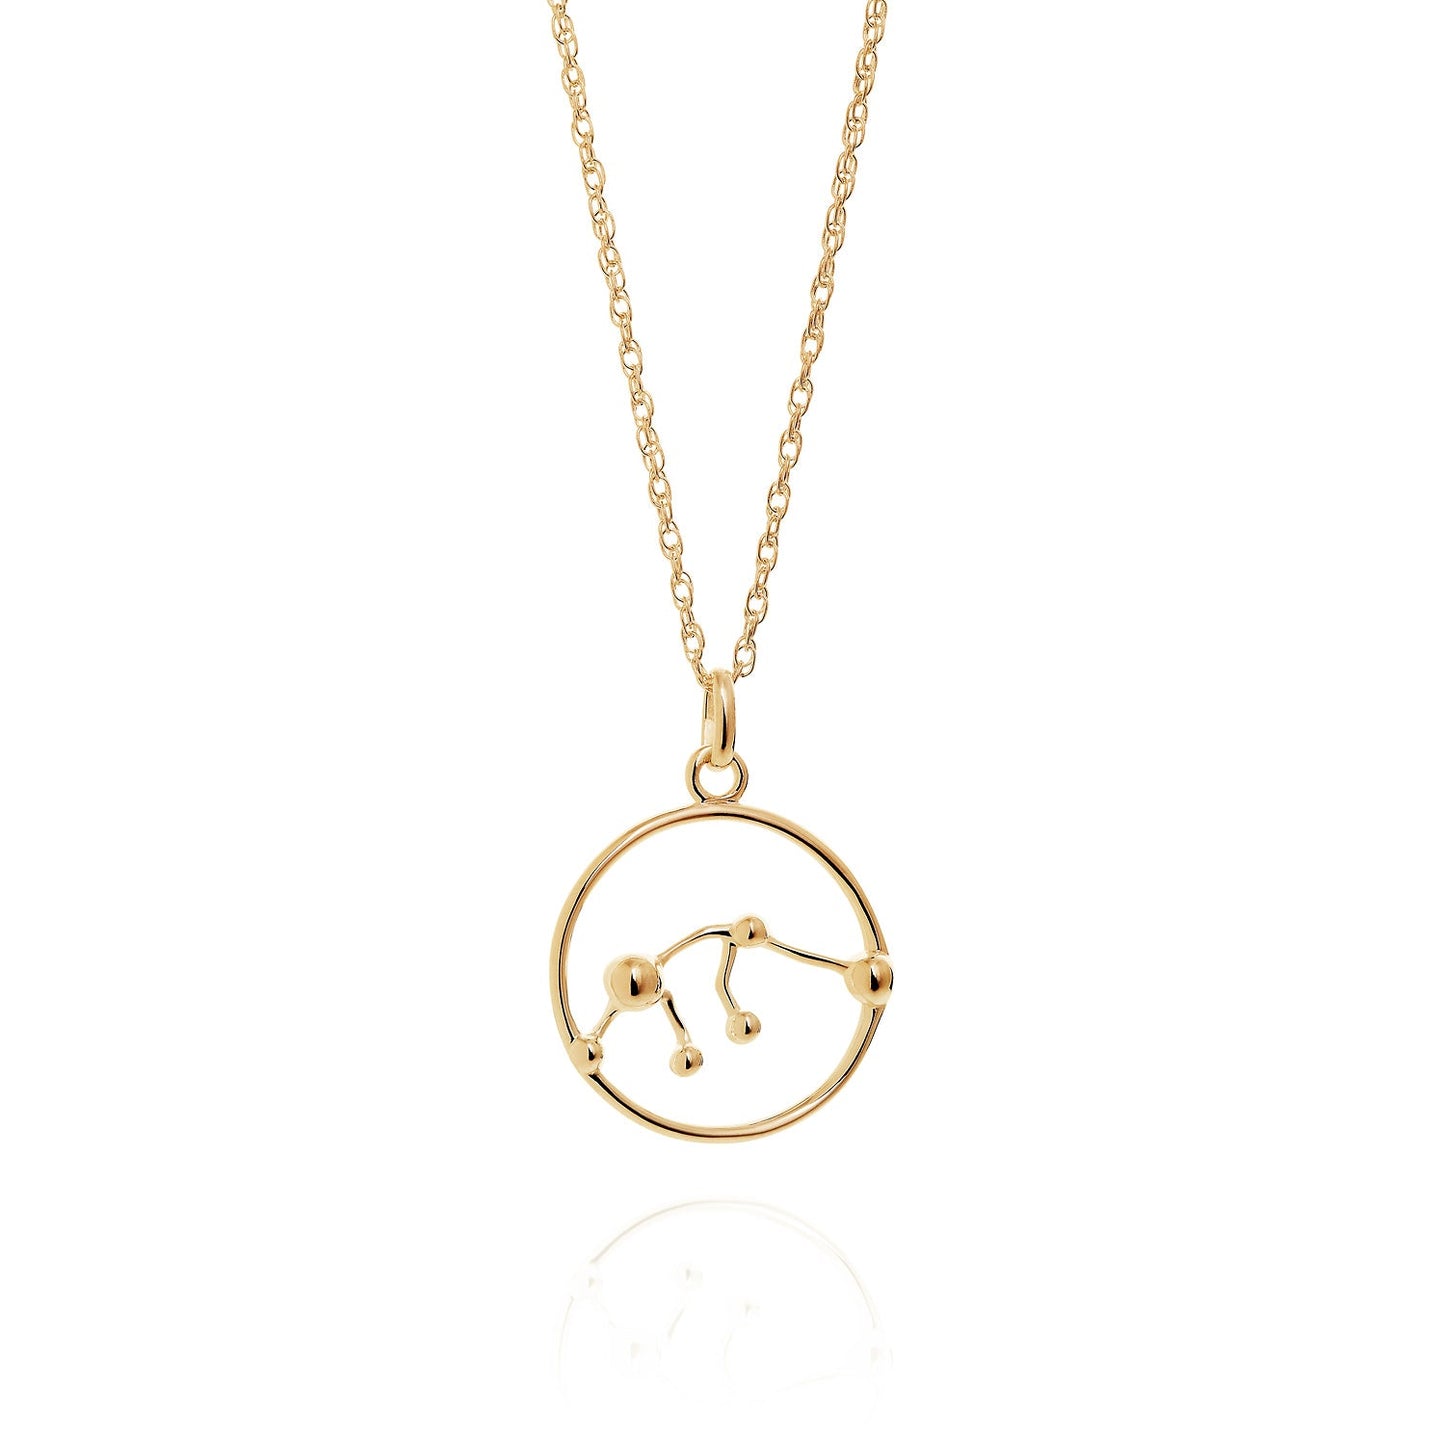 9ct Gold Astrology Necklace by Yasmin Everley